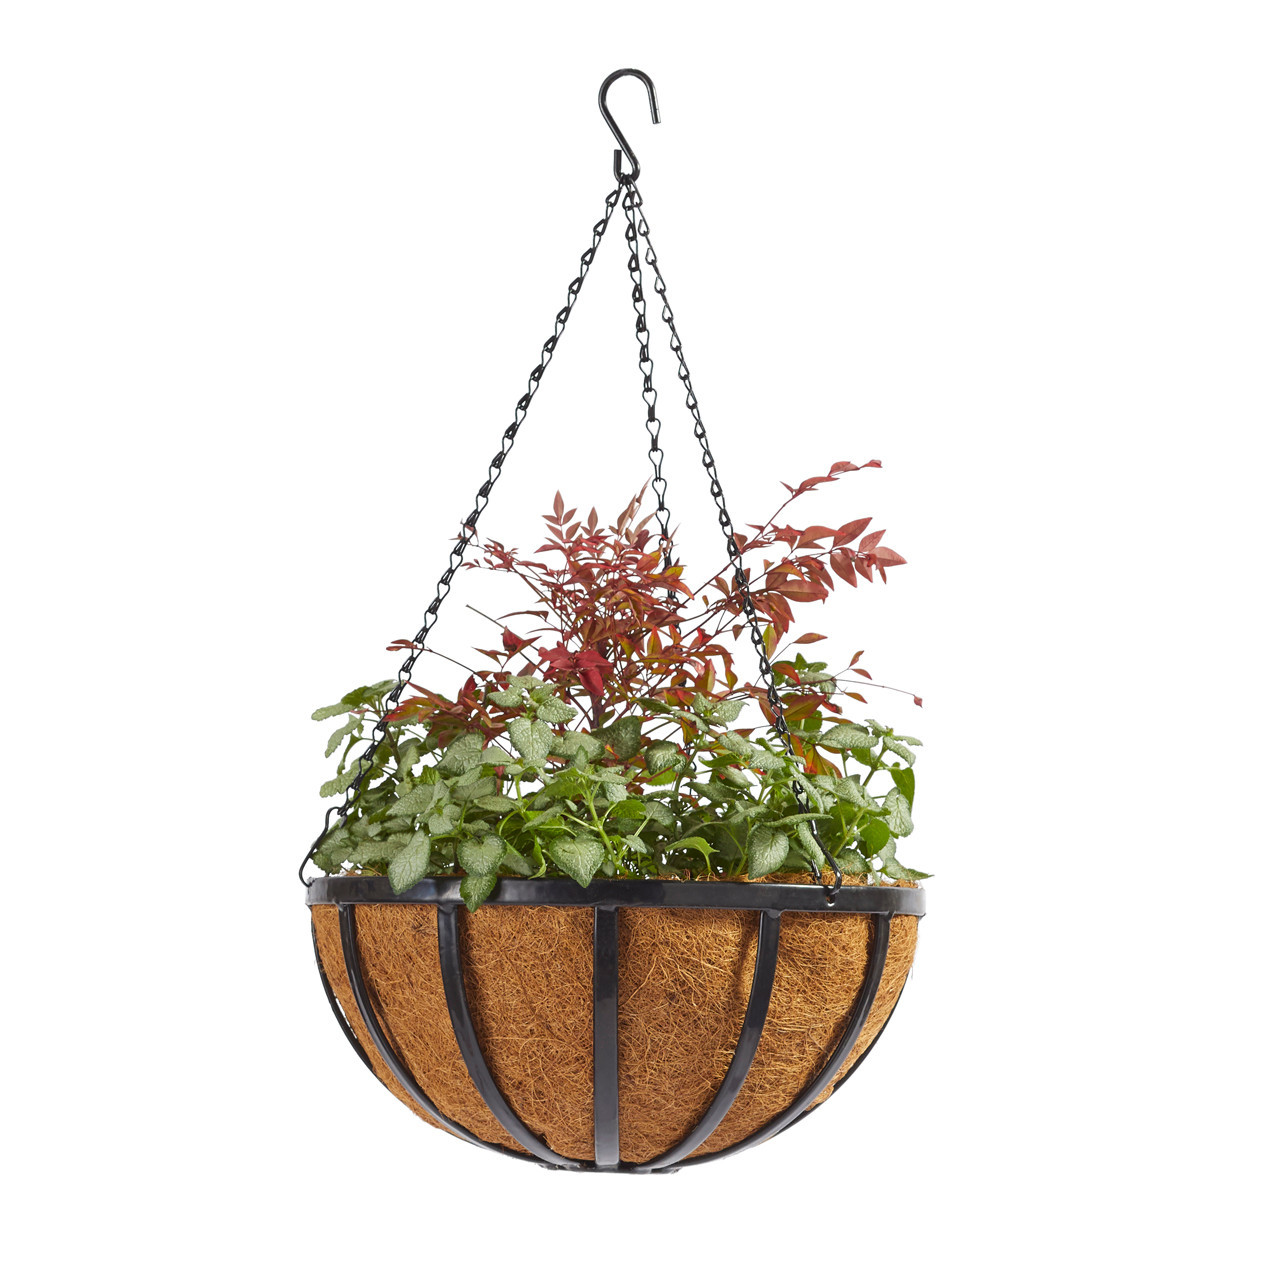 Hanging Basket Replacement Chains